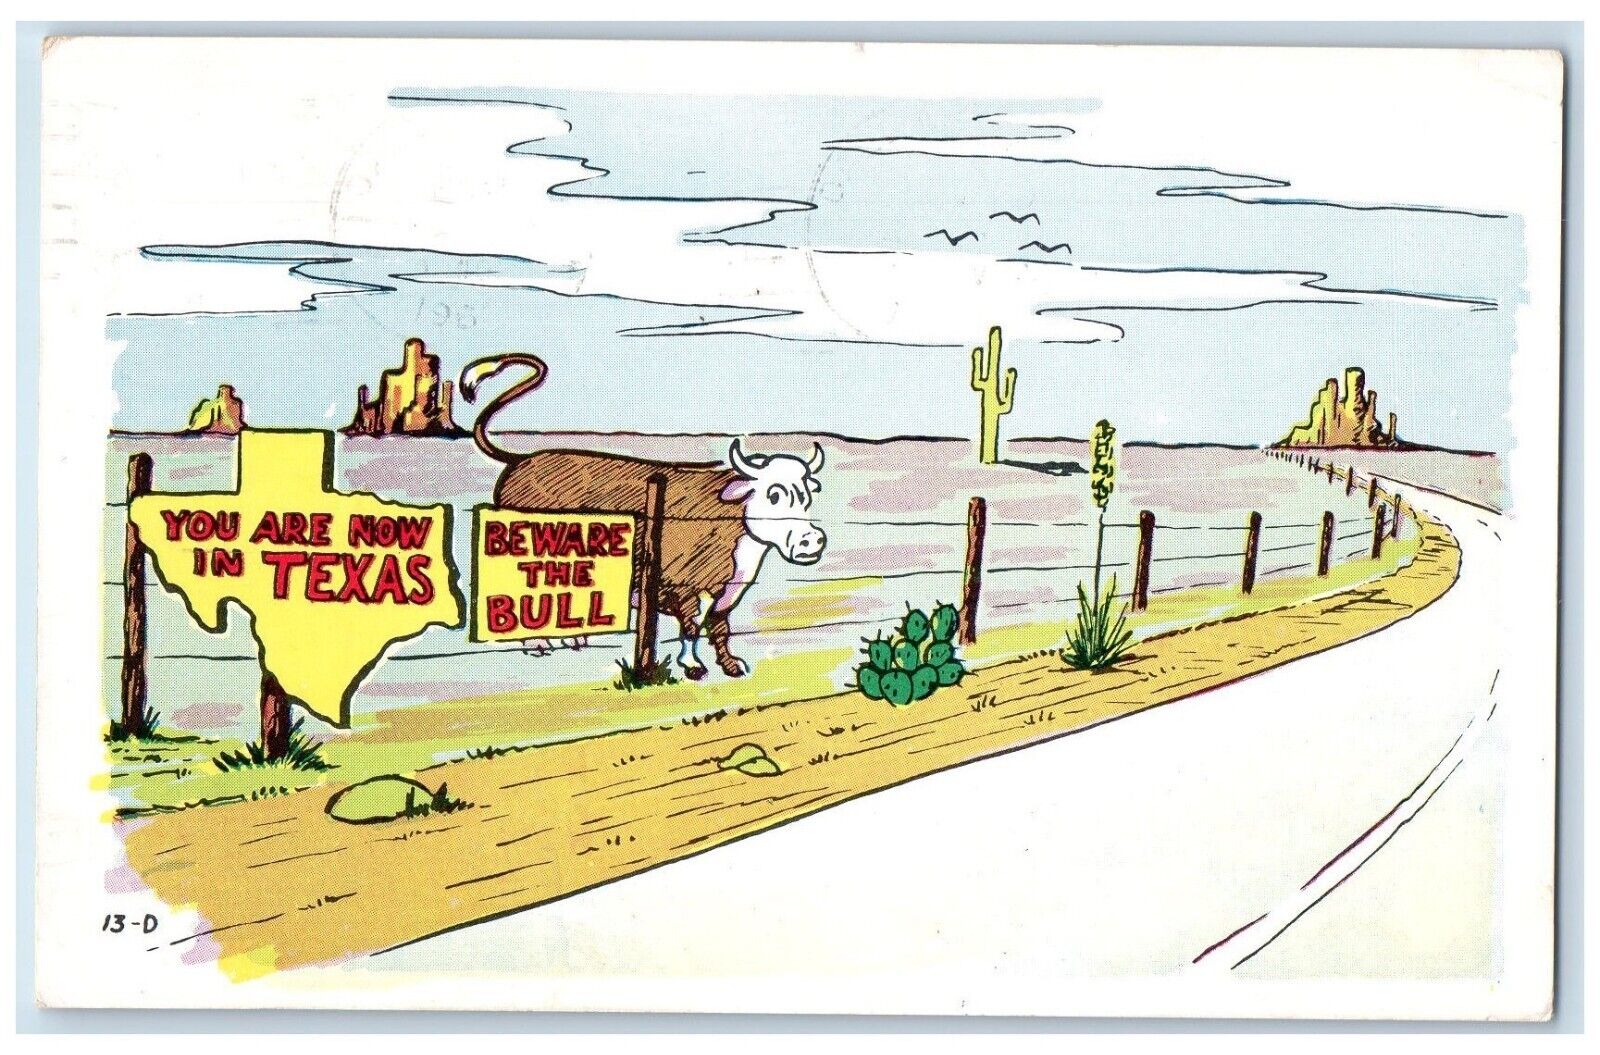 1967 Beware The Bull Fence Sign You Are Now In Texas TX Posted Vintage Postcard